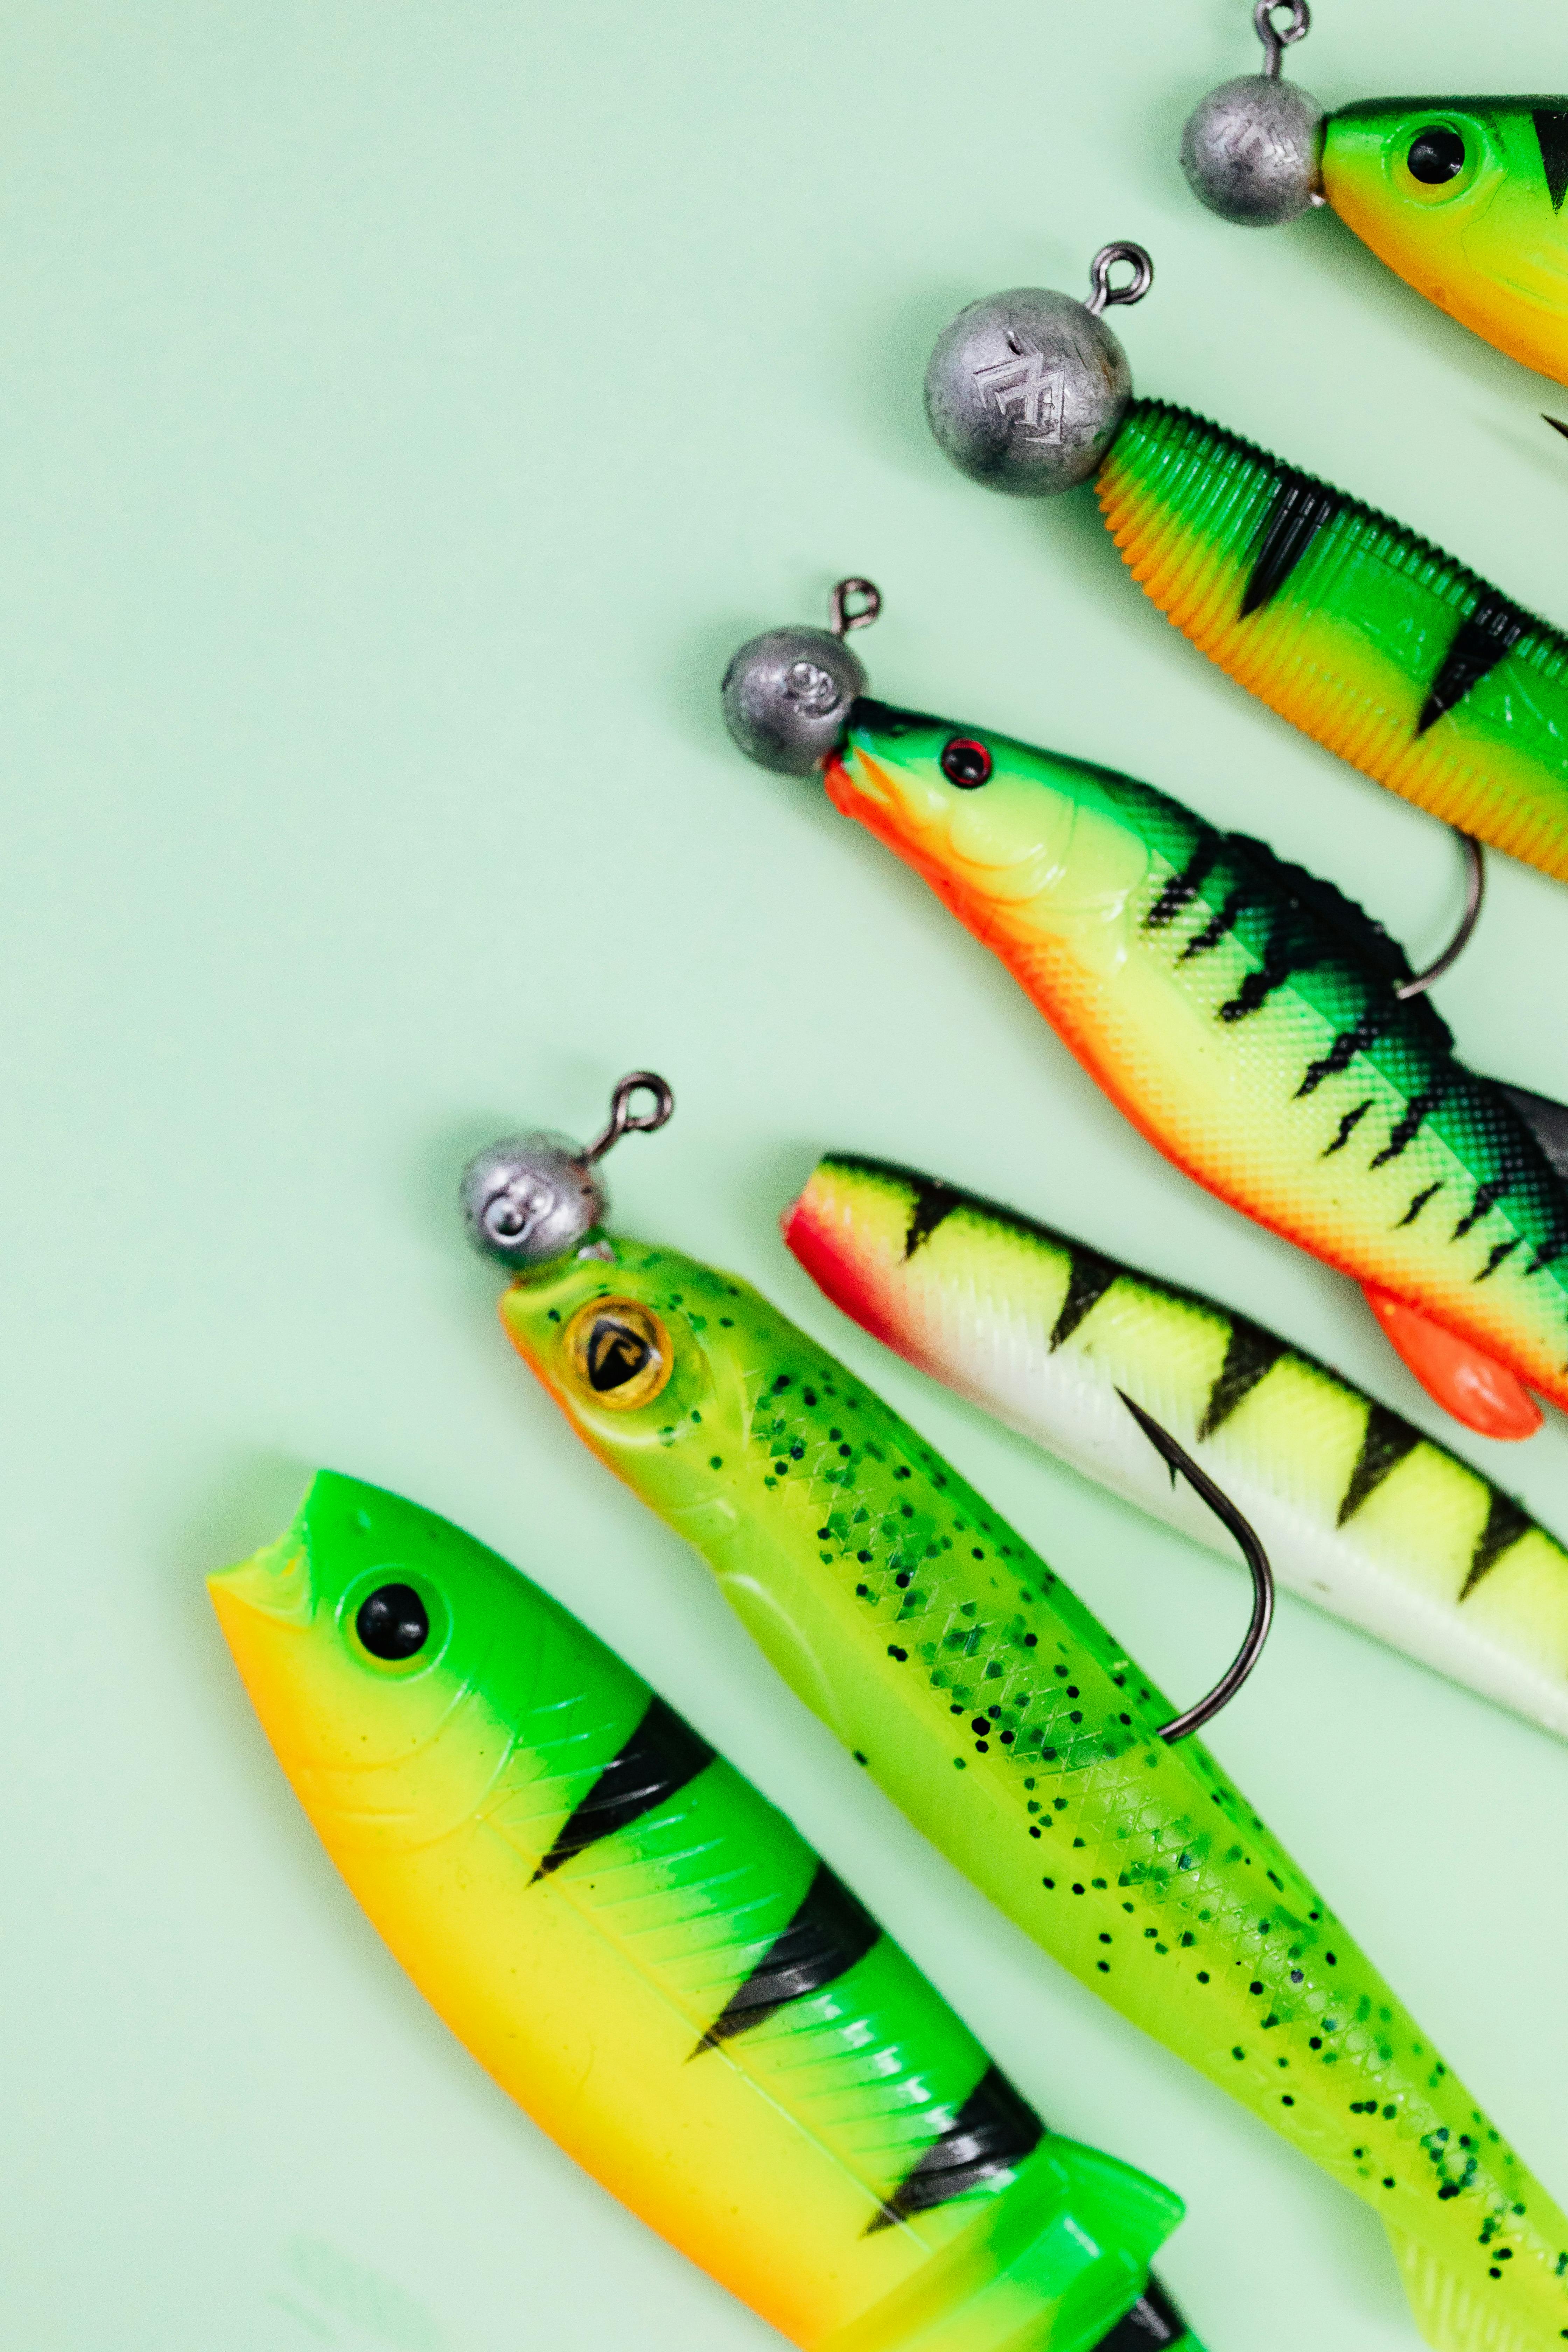 Green Fishing Lure on Black Stock Image - Image of green, catch